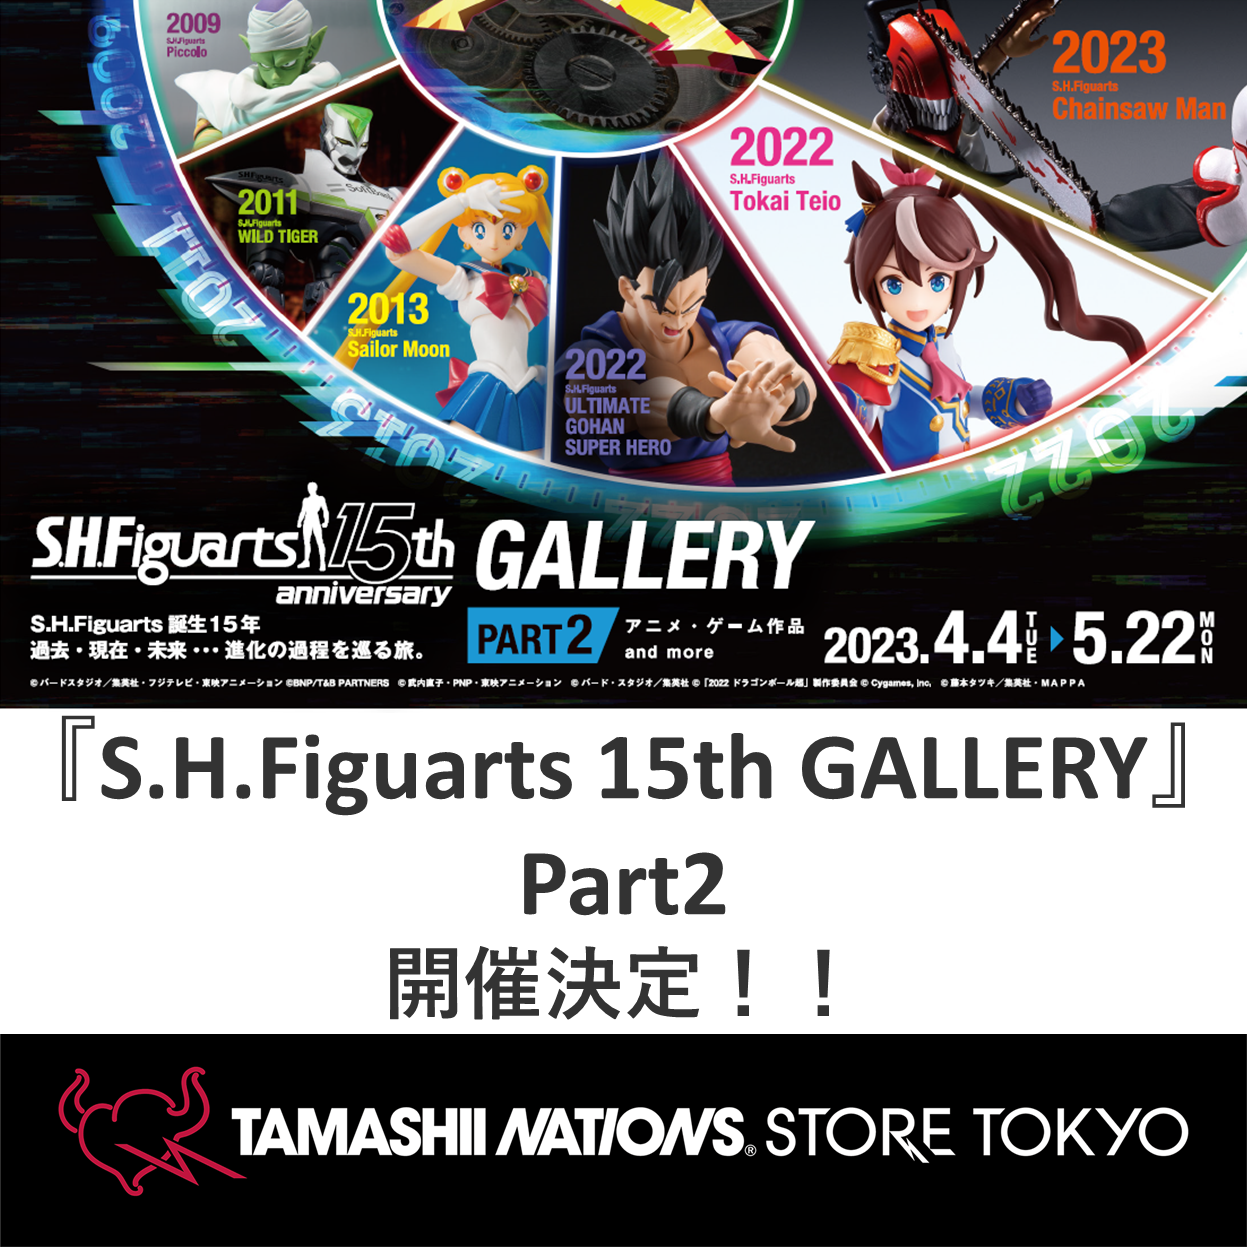 Special website [TAMASHII STORE] Information about the exhibition event "S.H.Figuarts 15th GALLERY - PART2" is now available!